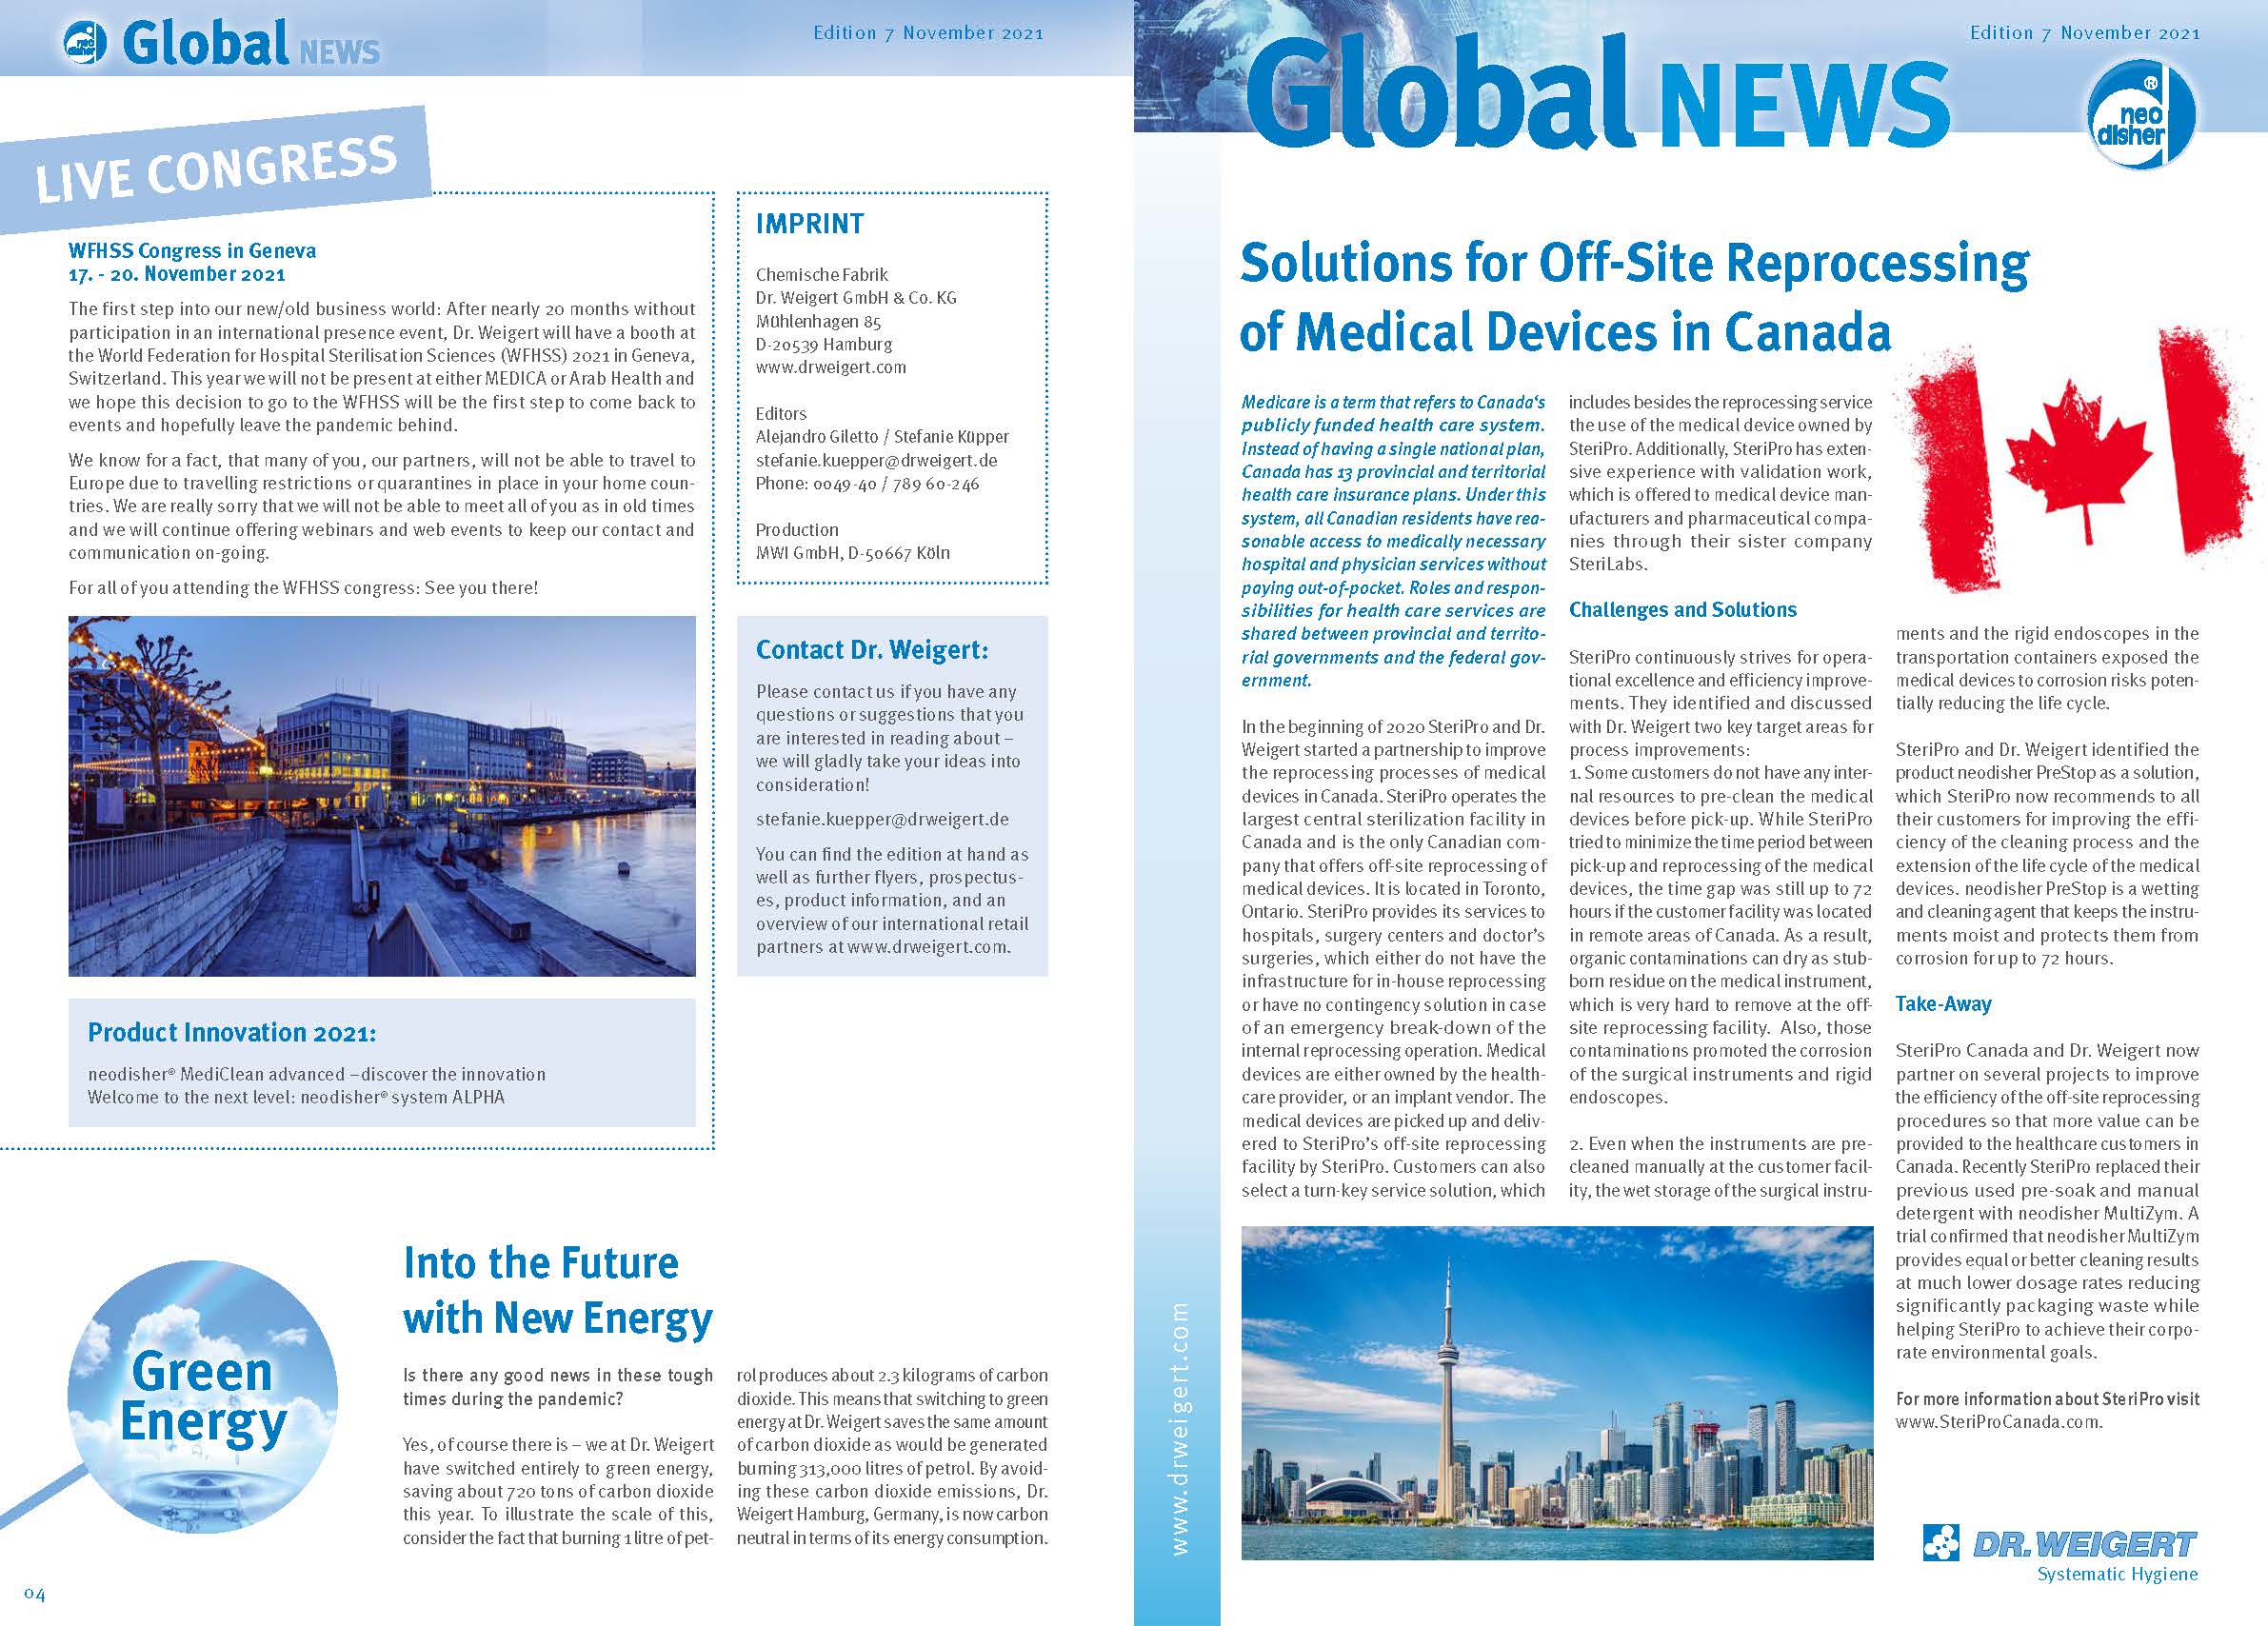 SteriLabs featured in Dr. Weigert Global News article published at the WFHSS Congress